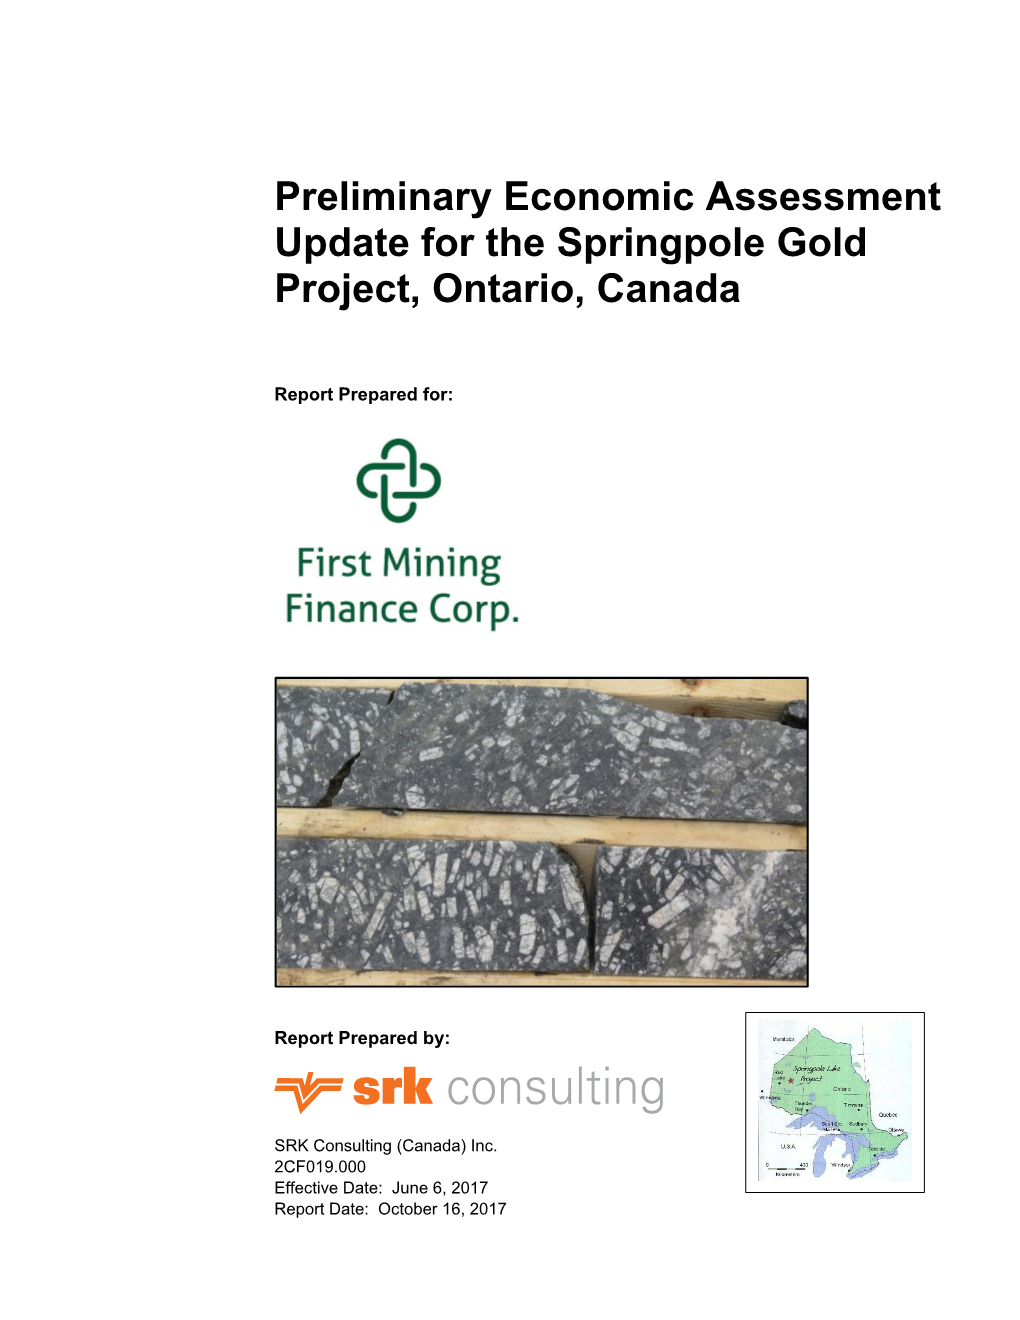 Preliminary Economic Assessment Update for the Springpole Gold Project, Ontario, Canada